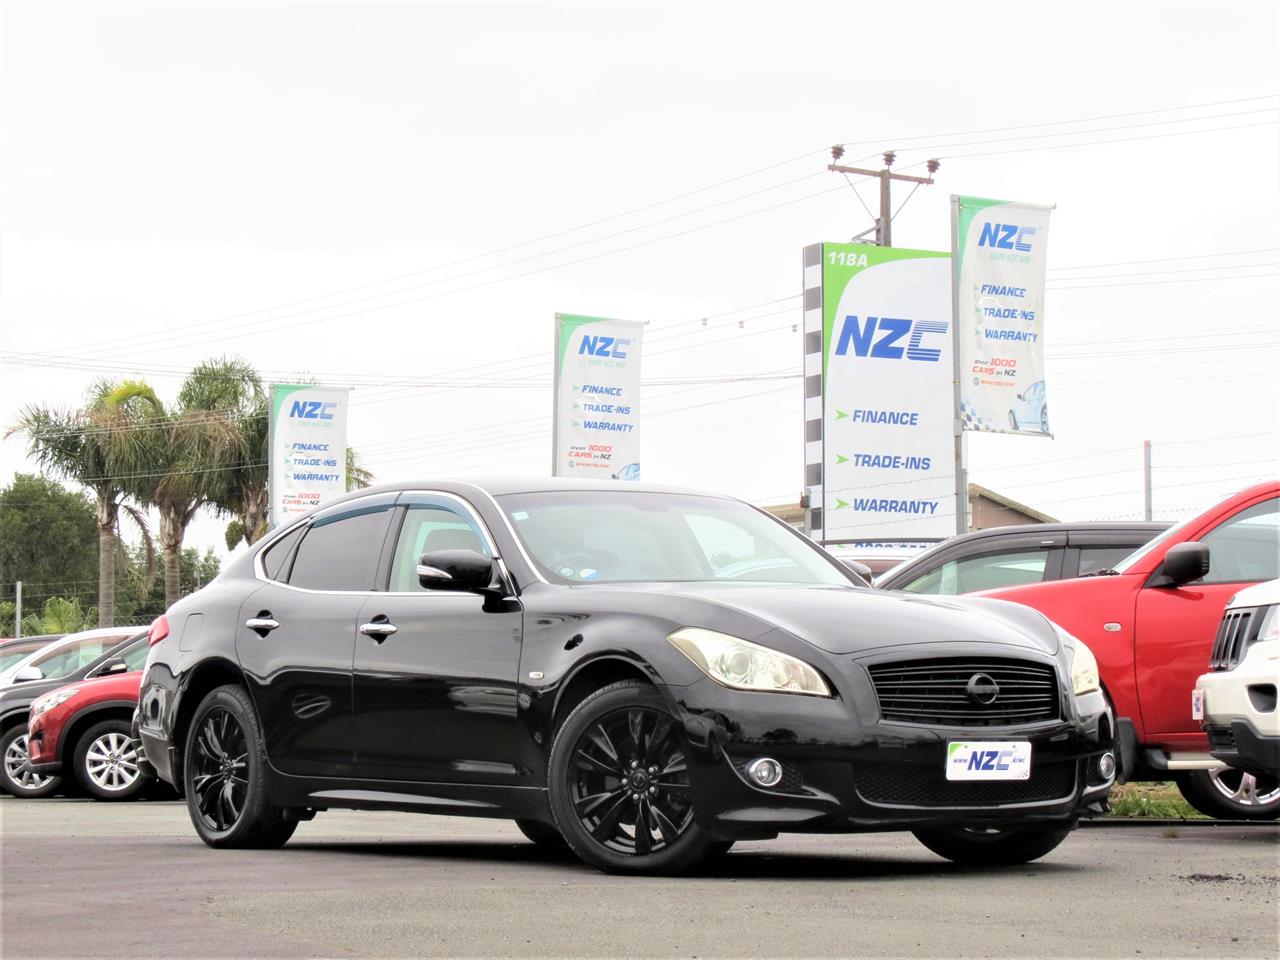 NZC best hot price for 2009 Nissan FUGA in Auckland